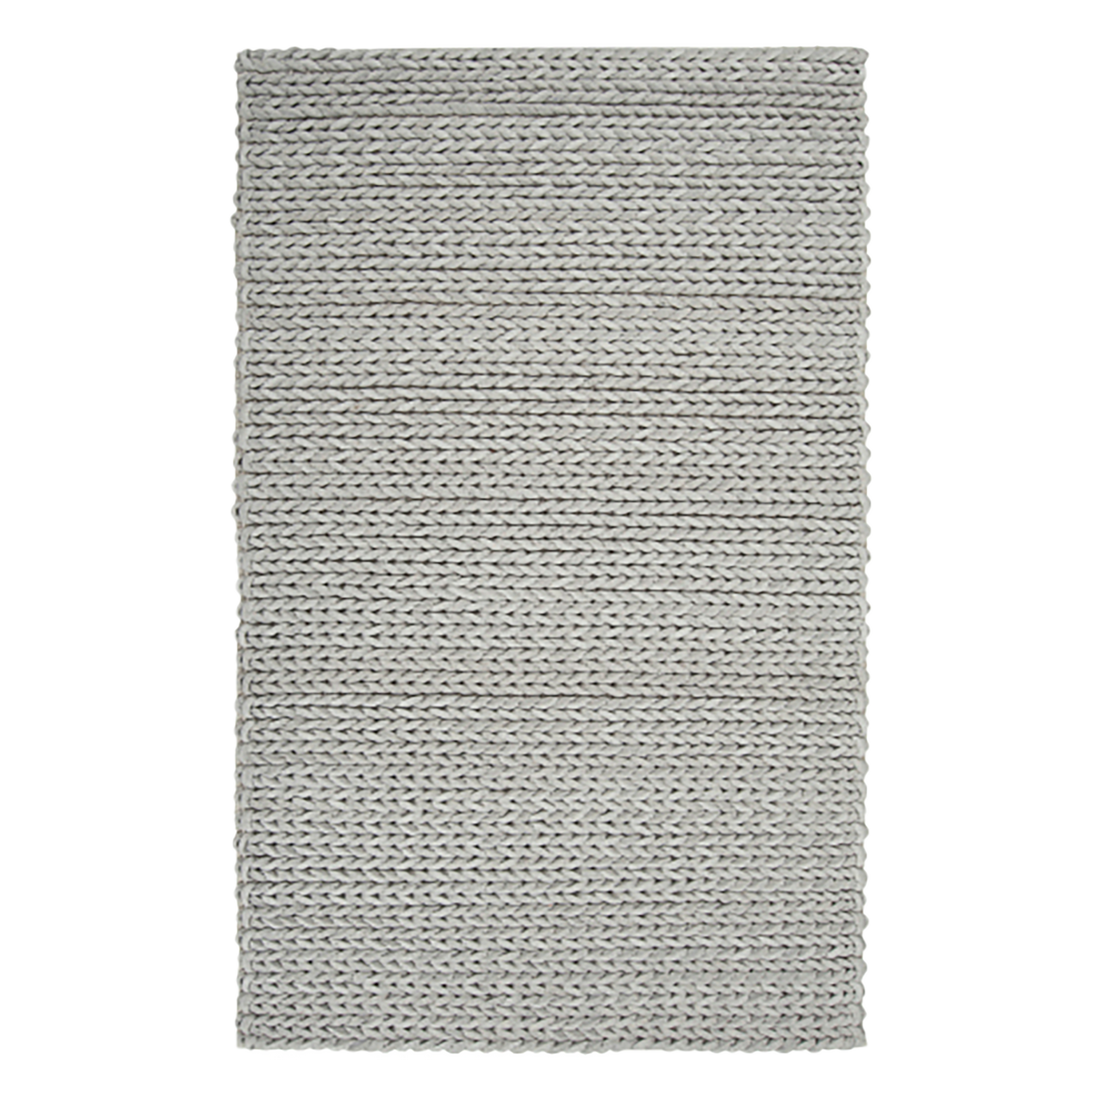 Anchorage Cable Knit Area Rug